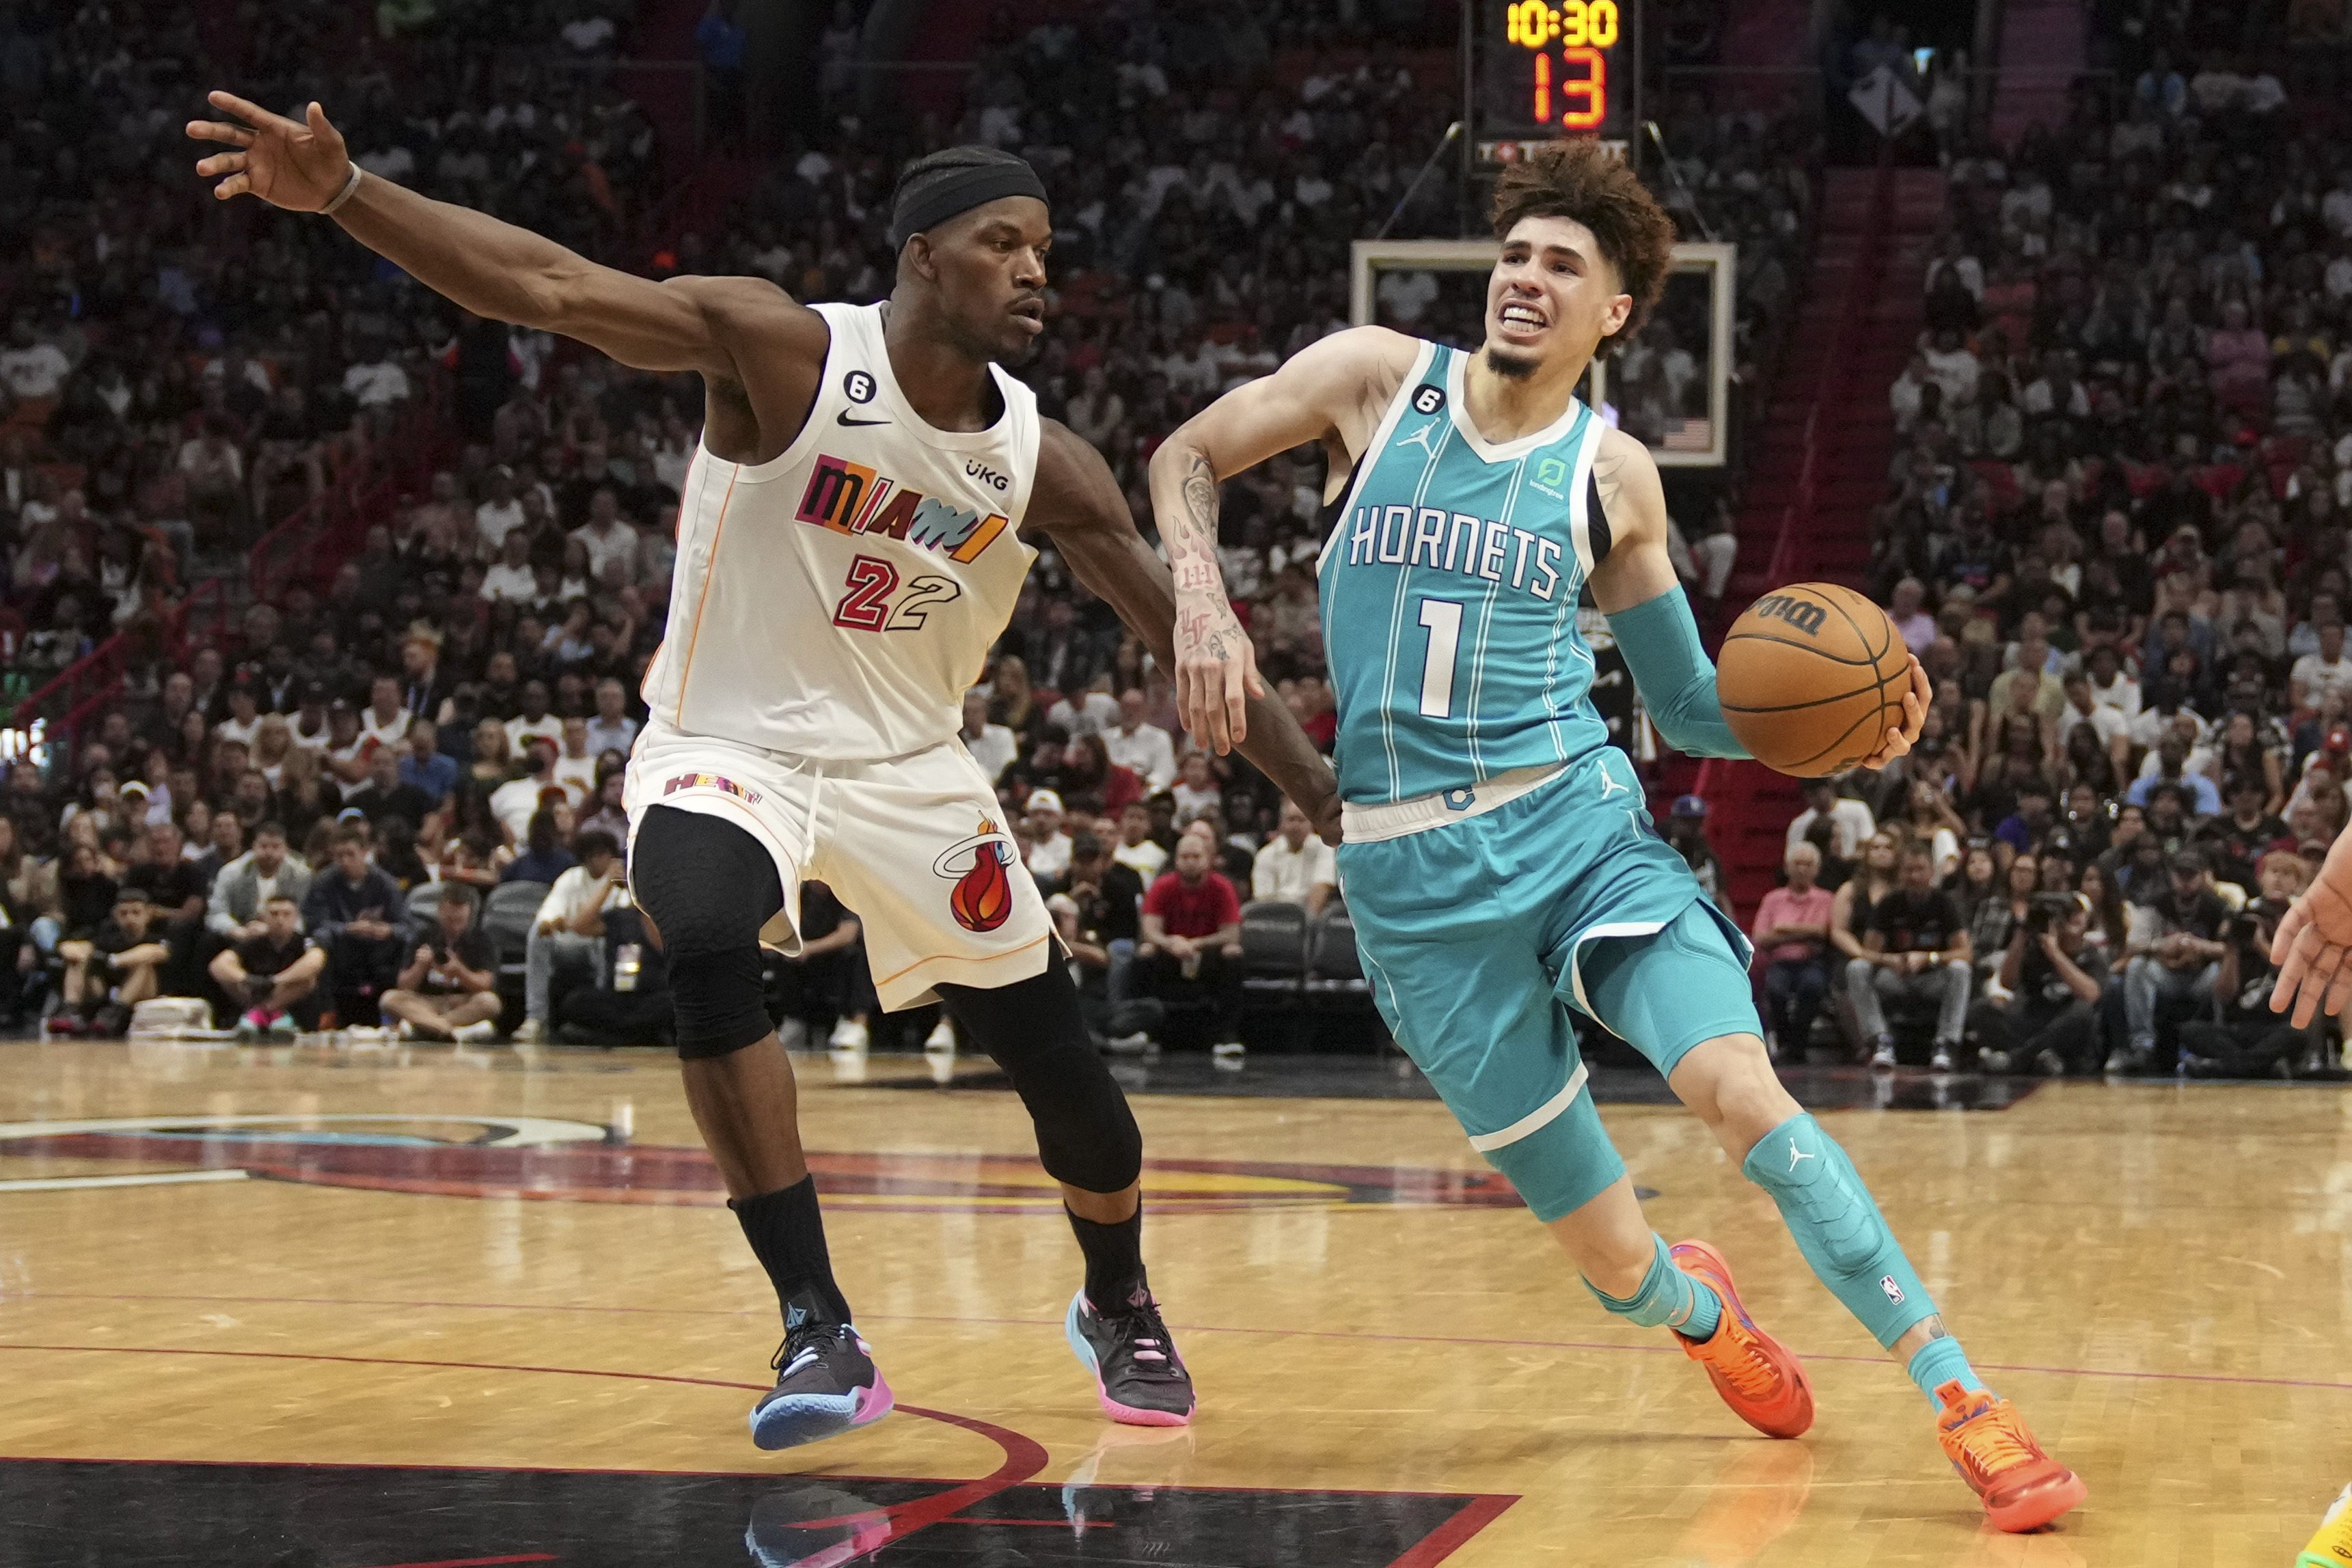  LaMelo Ball #1 of the Charlotte Hornets drives to the basket while being defended by Jimmy Butler #22 of the Miami Heat during Saturday's game.